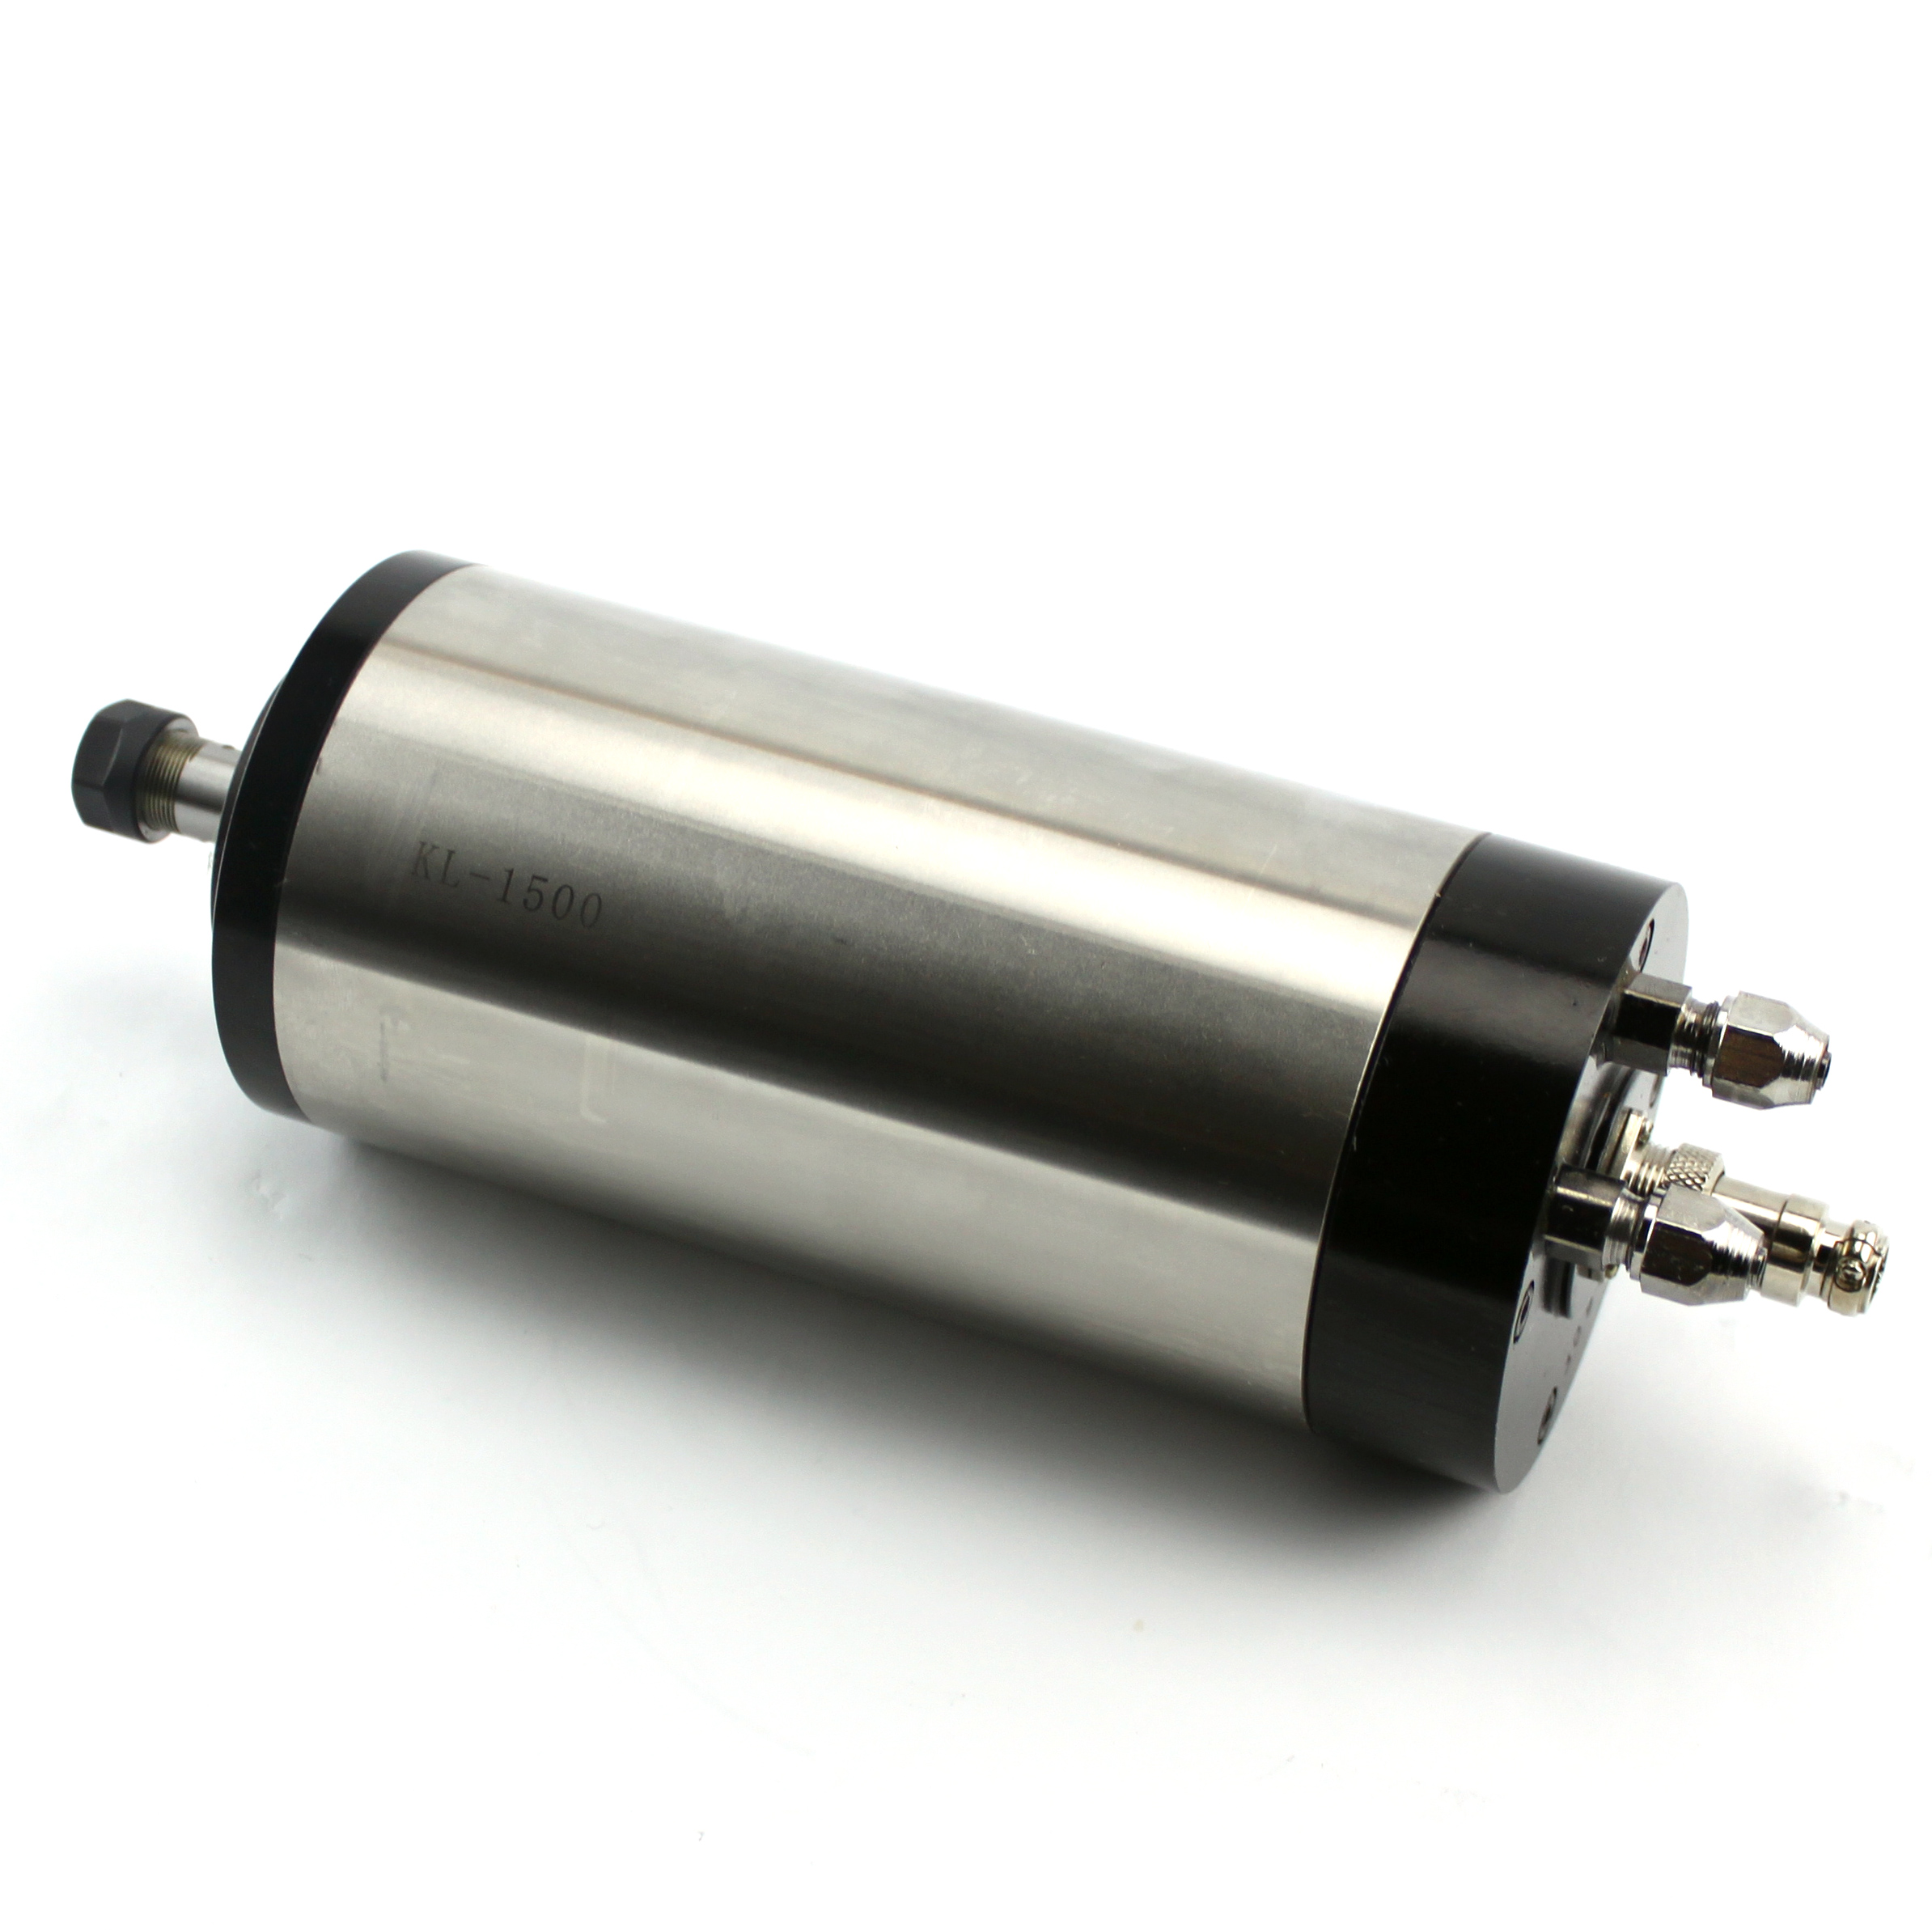 KL-1500 Gear Motor,Long Shaft High Temperature Motor with Cooling Fan DIY Machine Engine Accessory